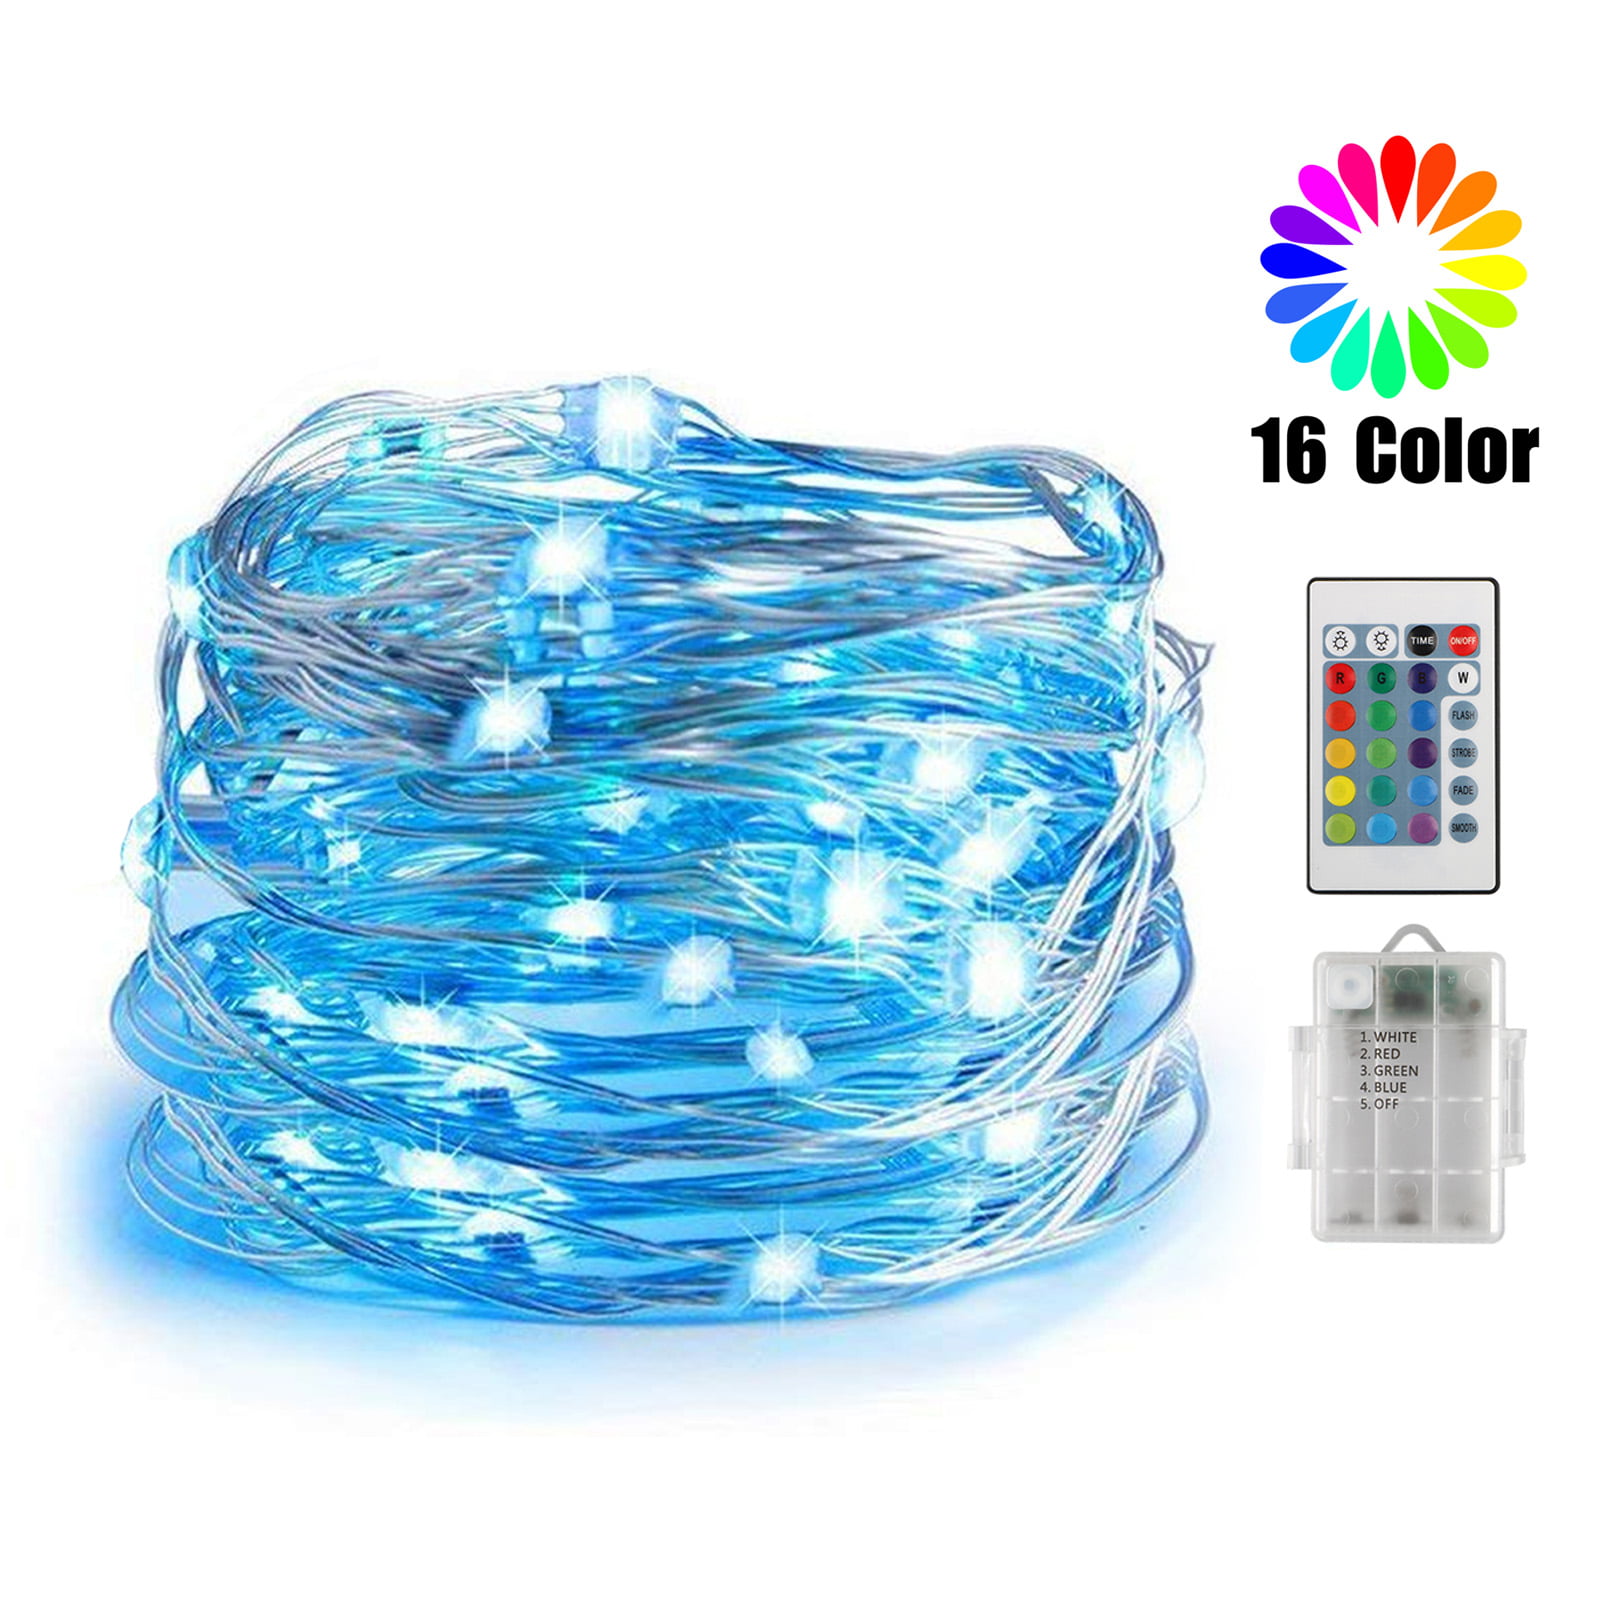 YIHONG Fairy String Lights Battery Operated/50 LED Lights 